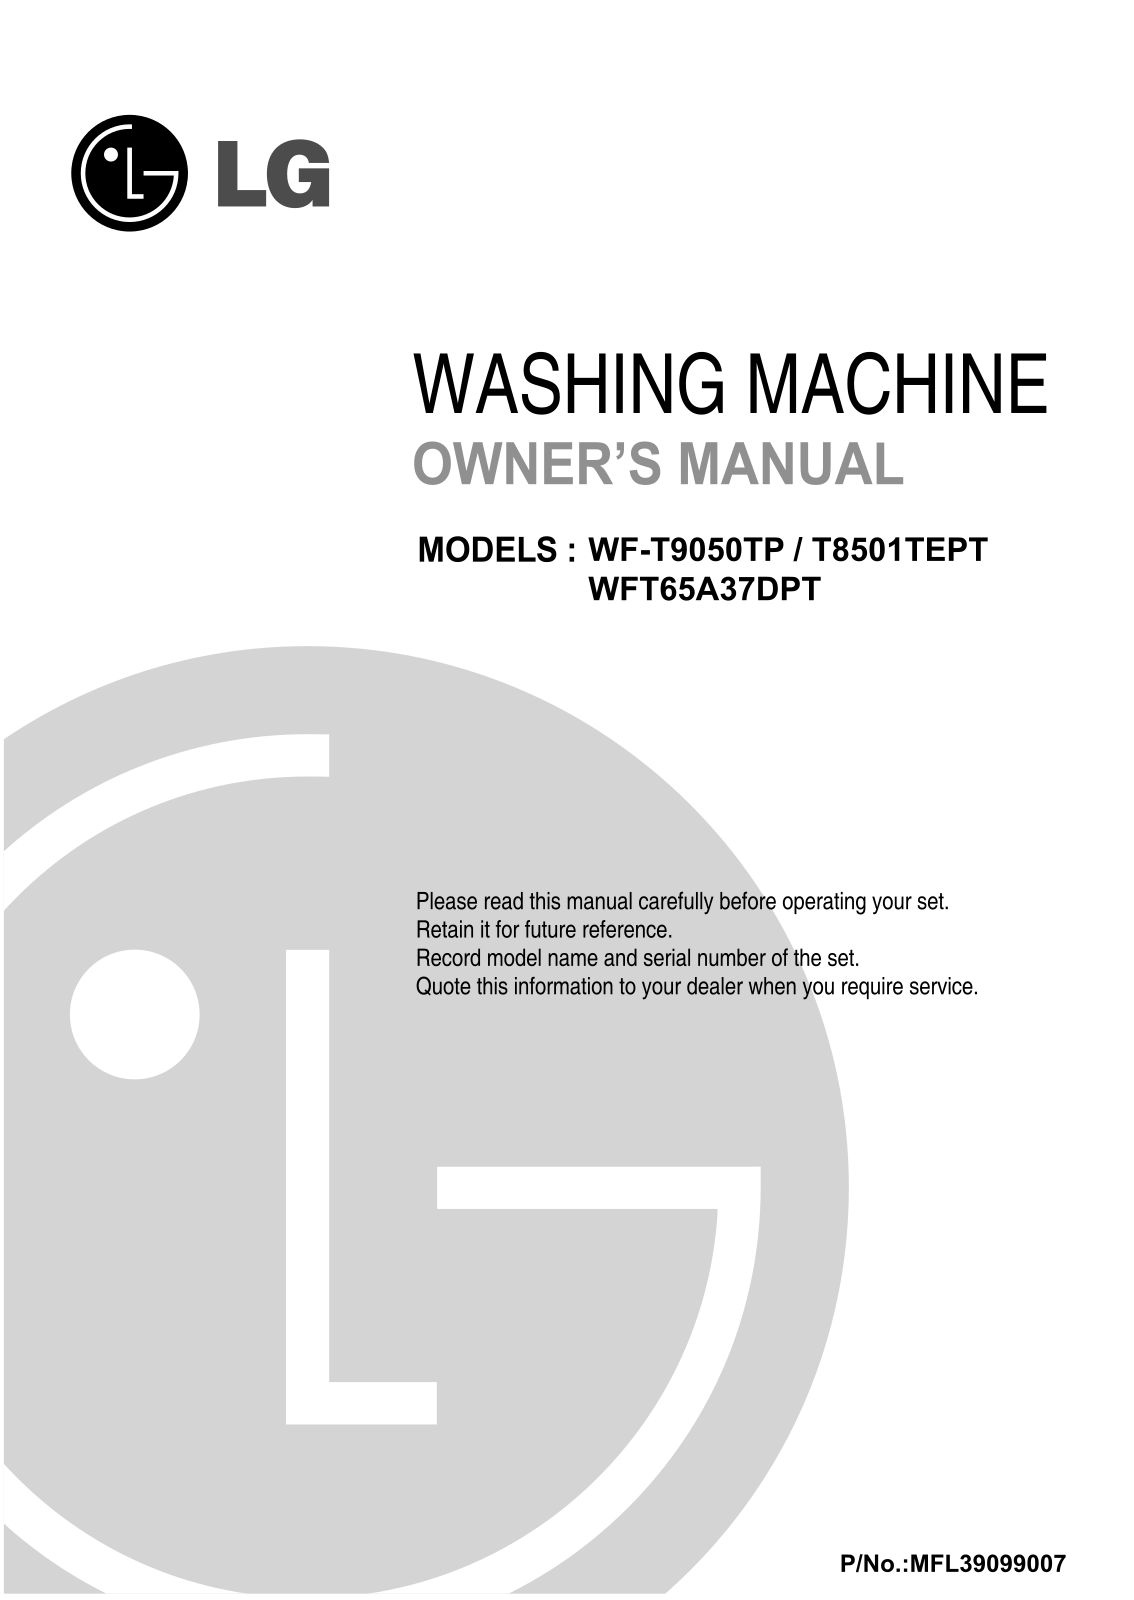 LG WFT65A37DPT Owner’s Manual